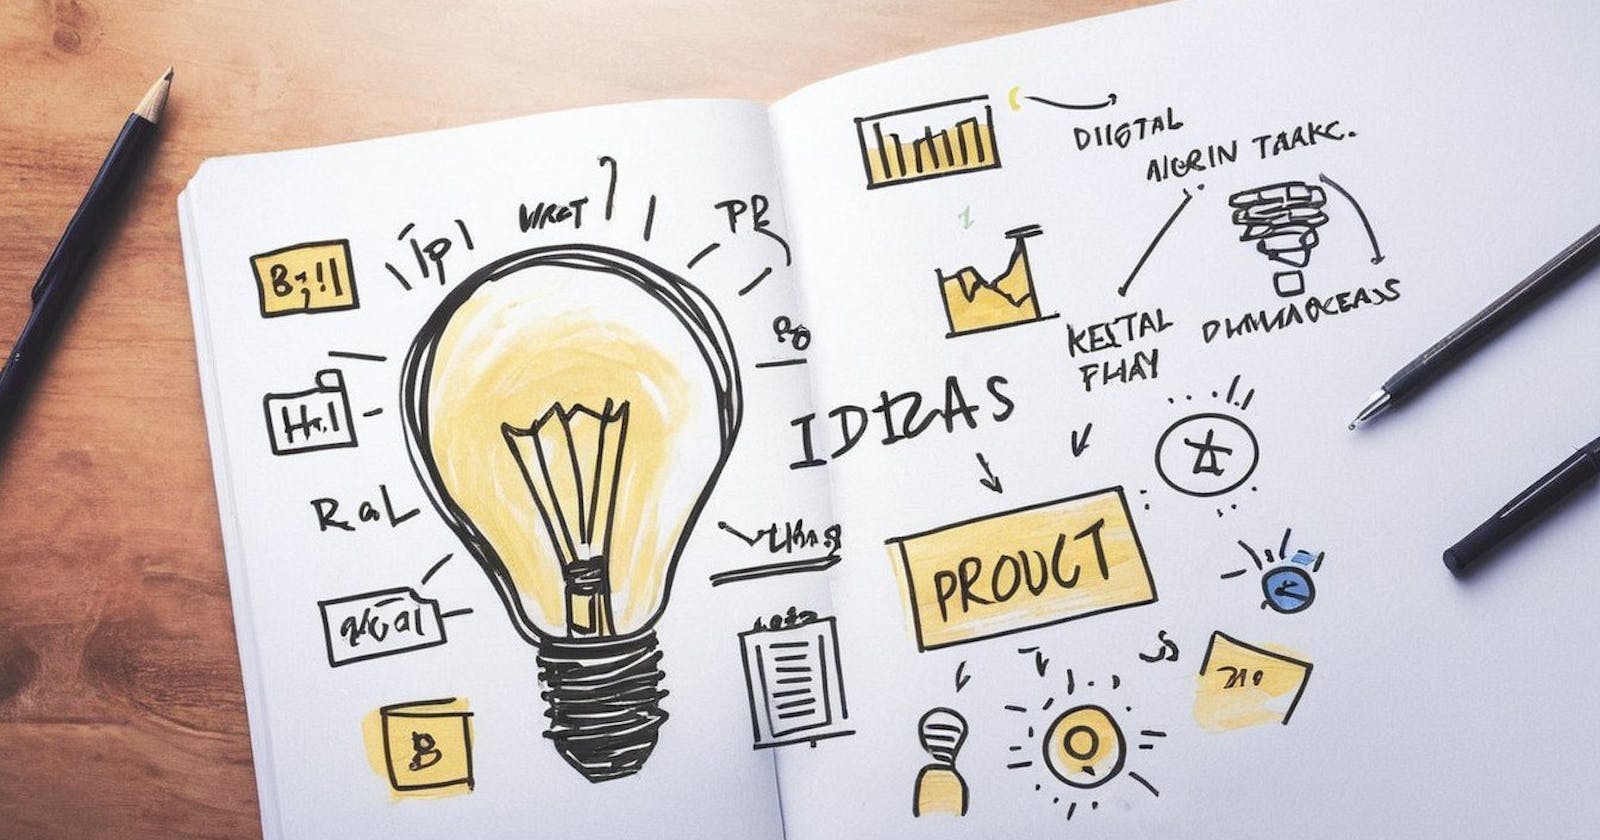 How to Come Up with Digital Product Ideas That Solve Real Problems